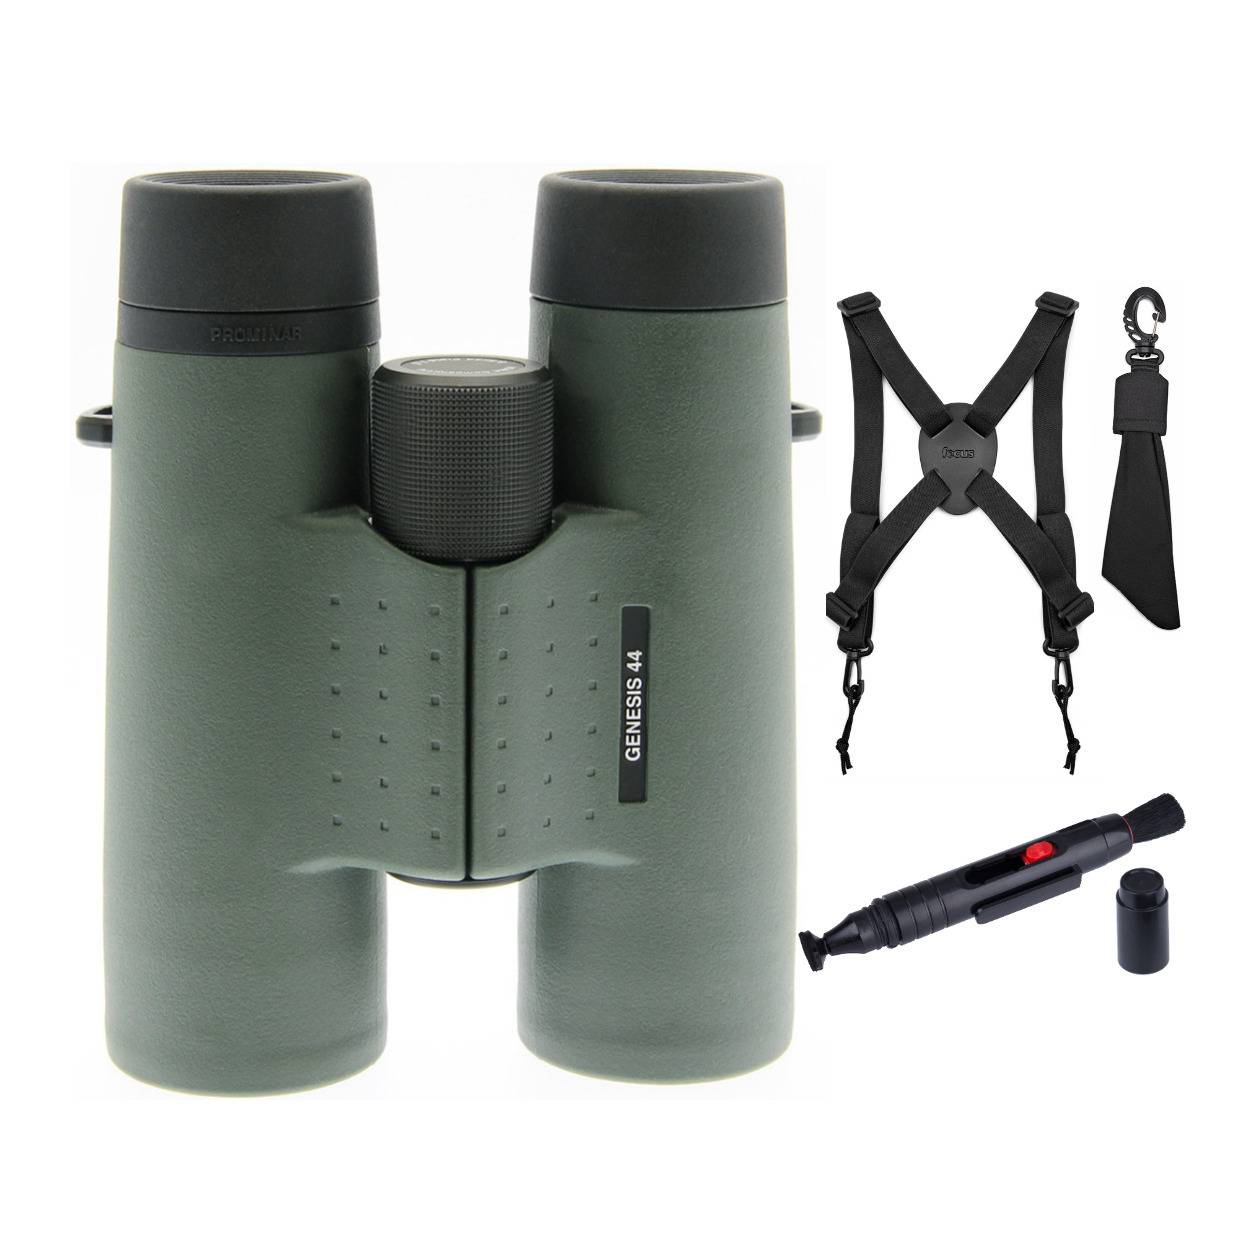 Kowa 8.5x44 Prominar XD Lens Roof Prism Binoculars with Harness and Lens Pen